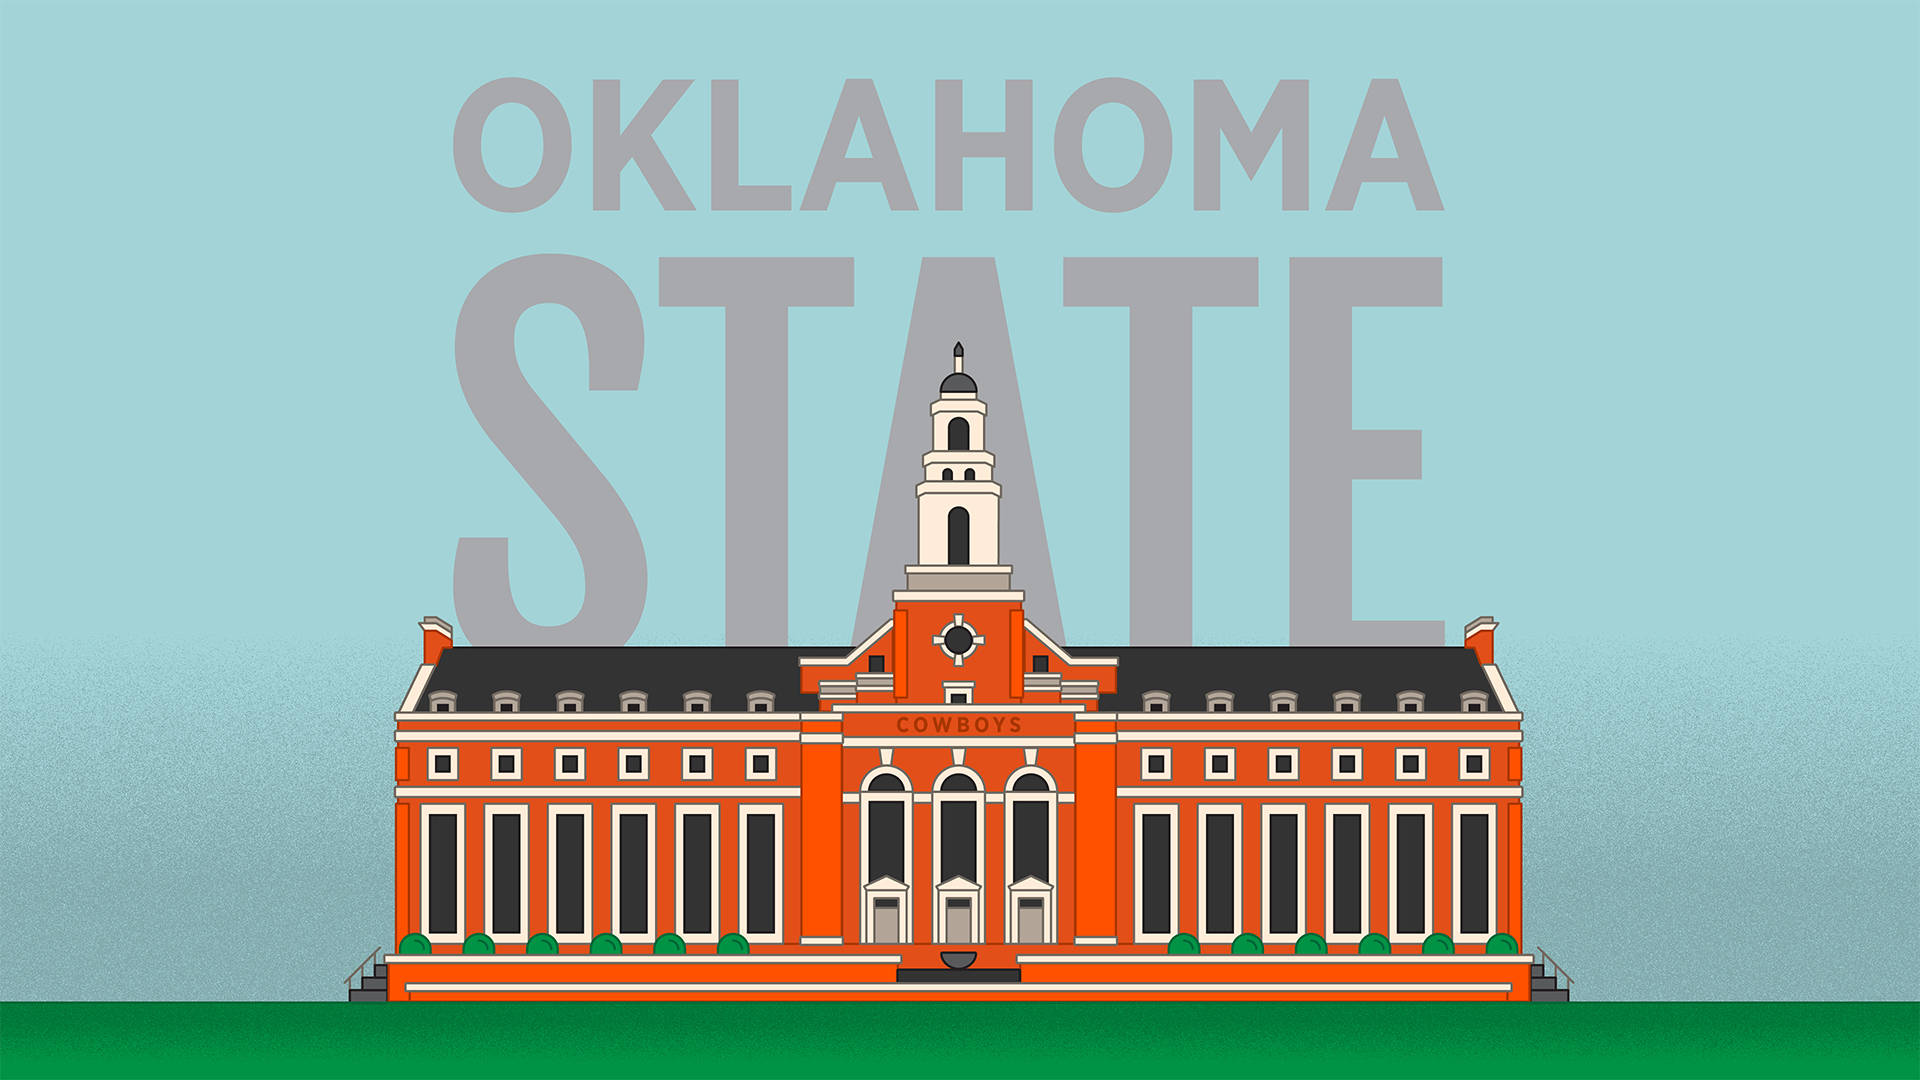 Oklahoma Pictures Wallpaper